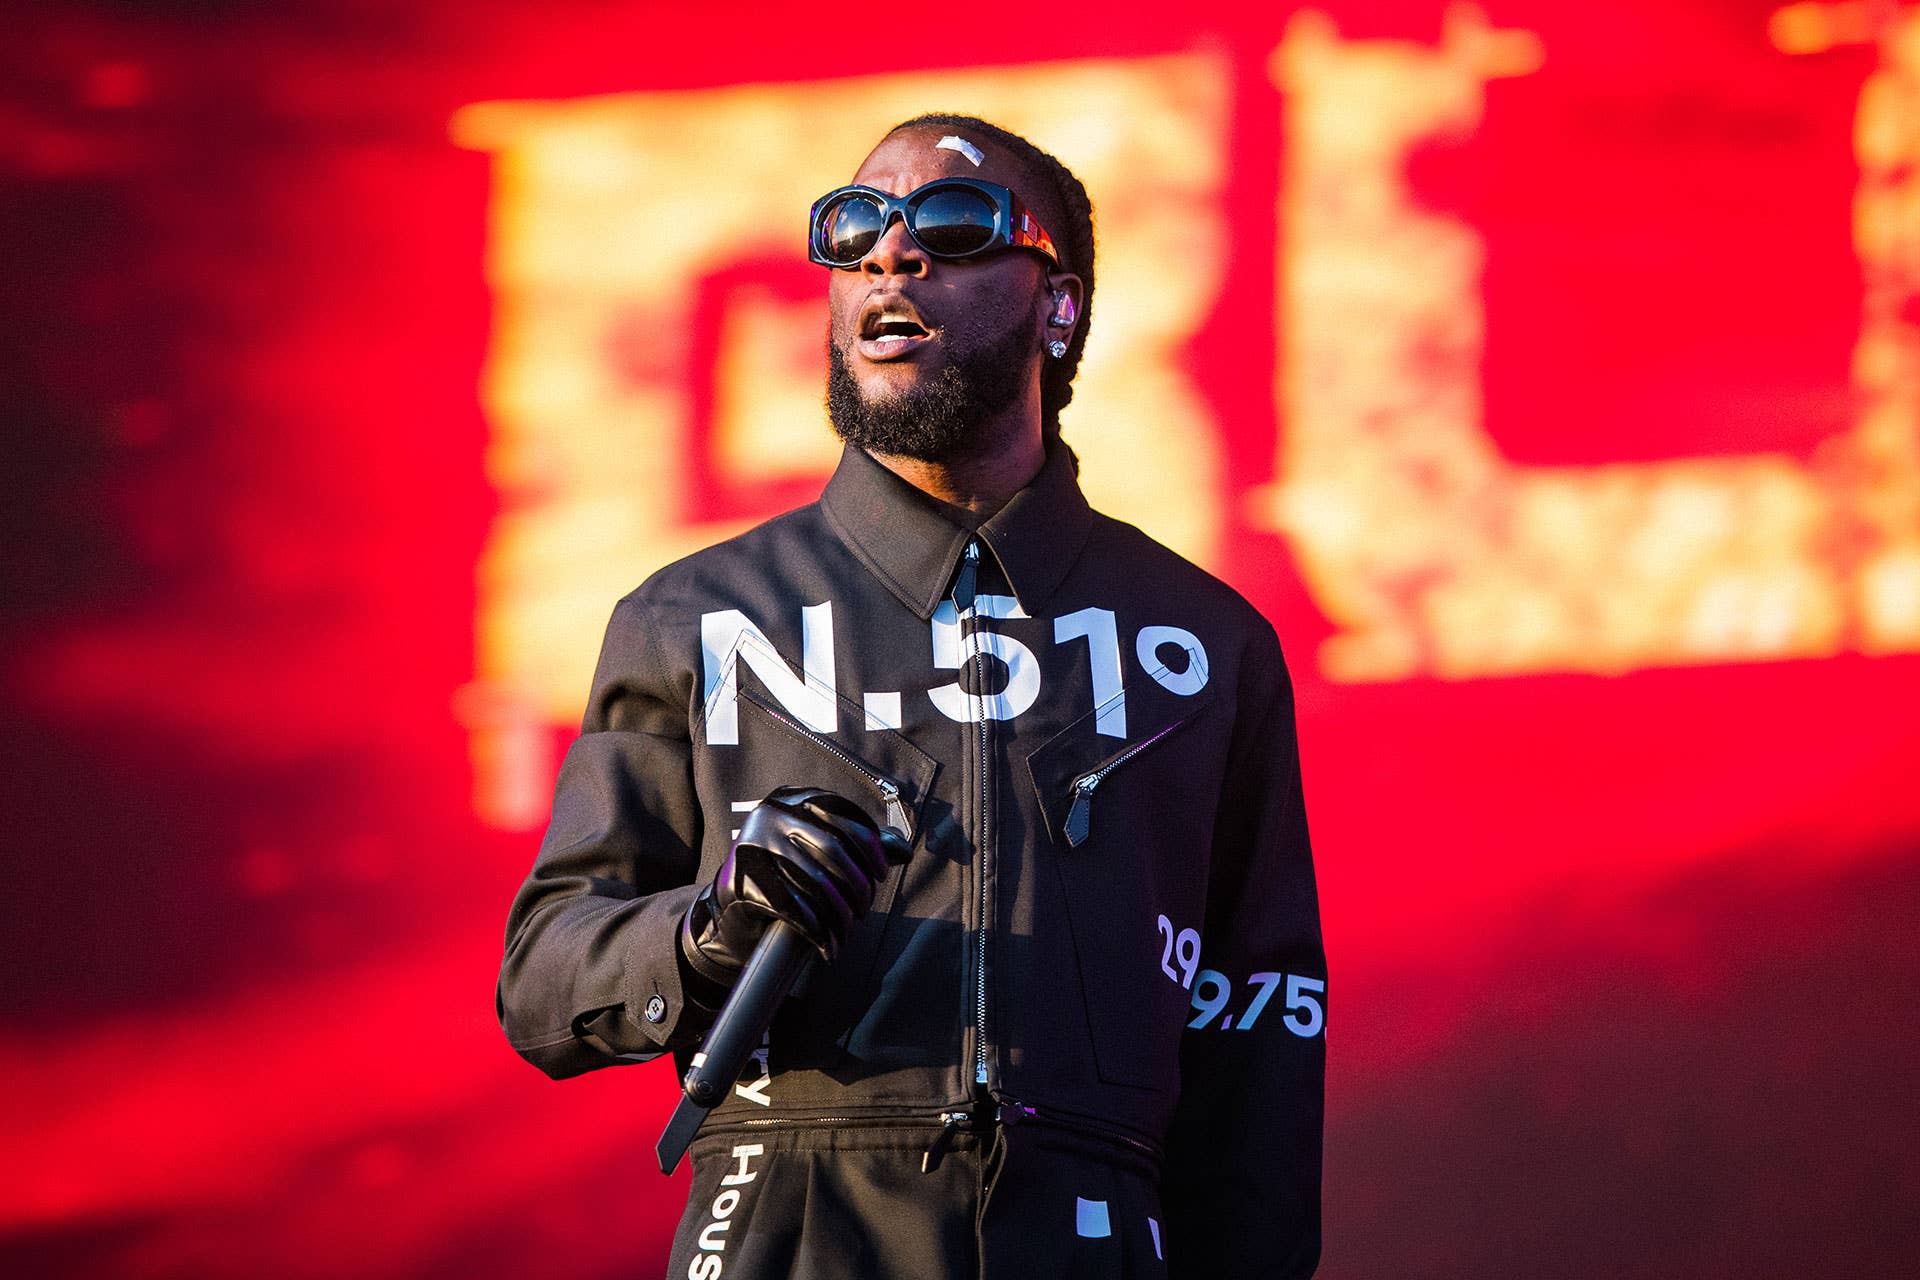 Burna Boy performs on the Other stag during day four of Glastonbury Festival at Worthy Farm, Pilton on June 25, 2022